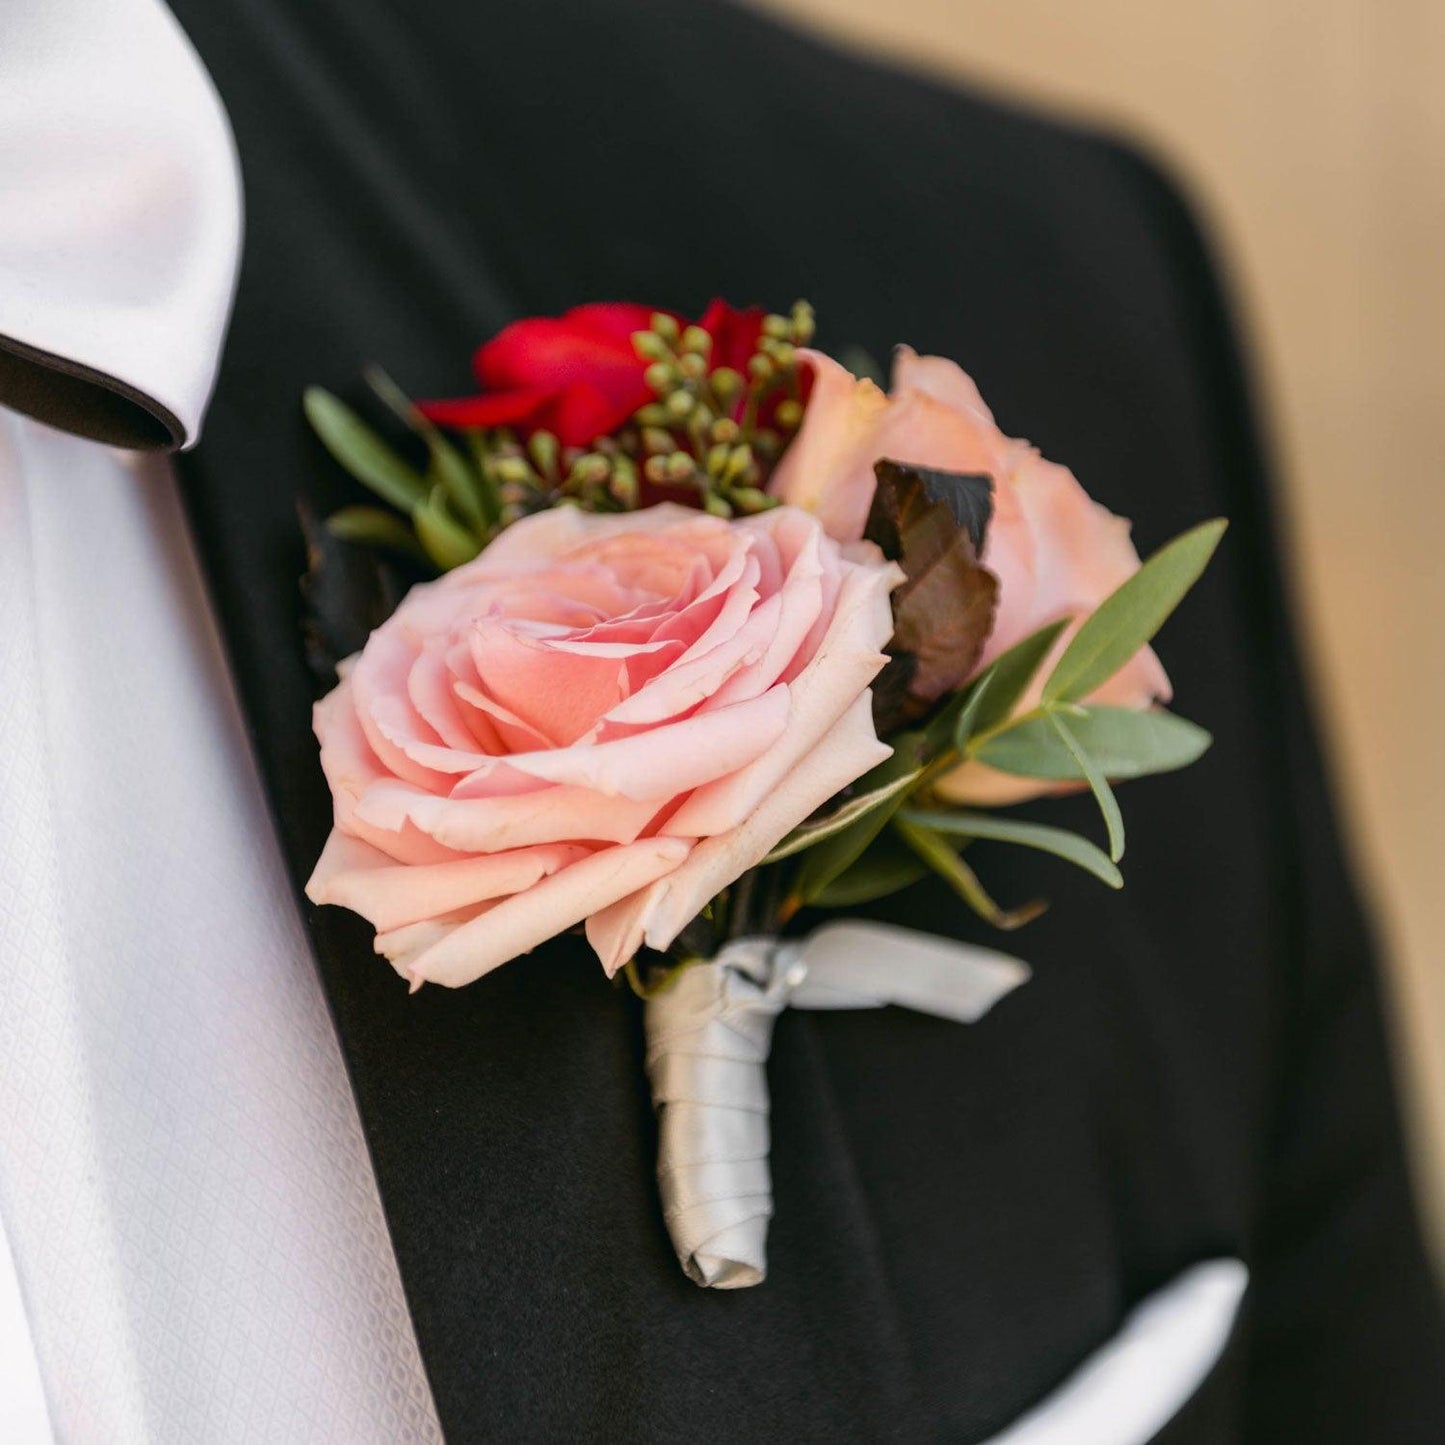 Elegant boutonniere made of pink flowers and green leaves, Order online for wedding & event flowers from the best florist in Toronto near you.